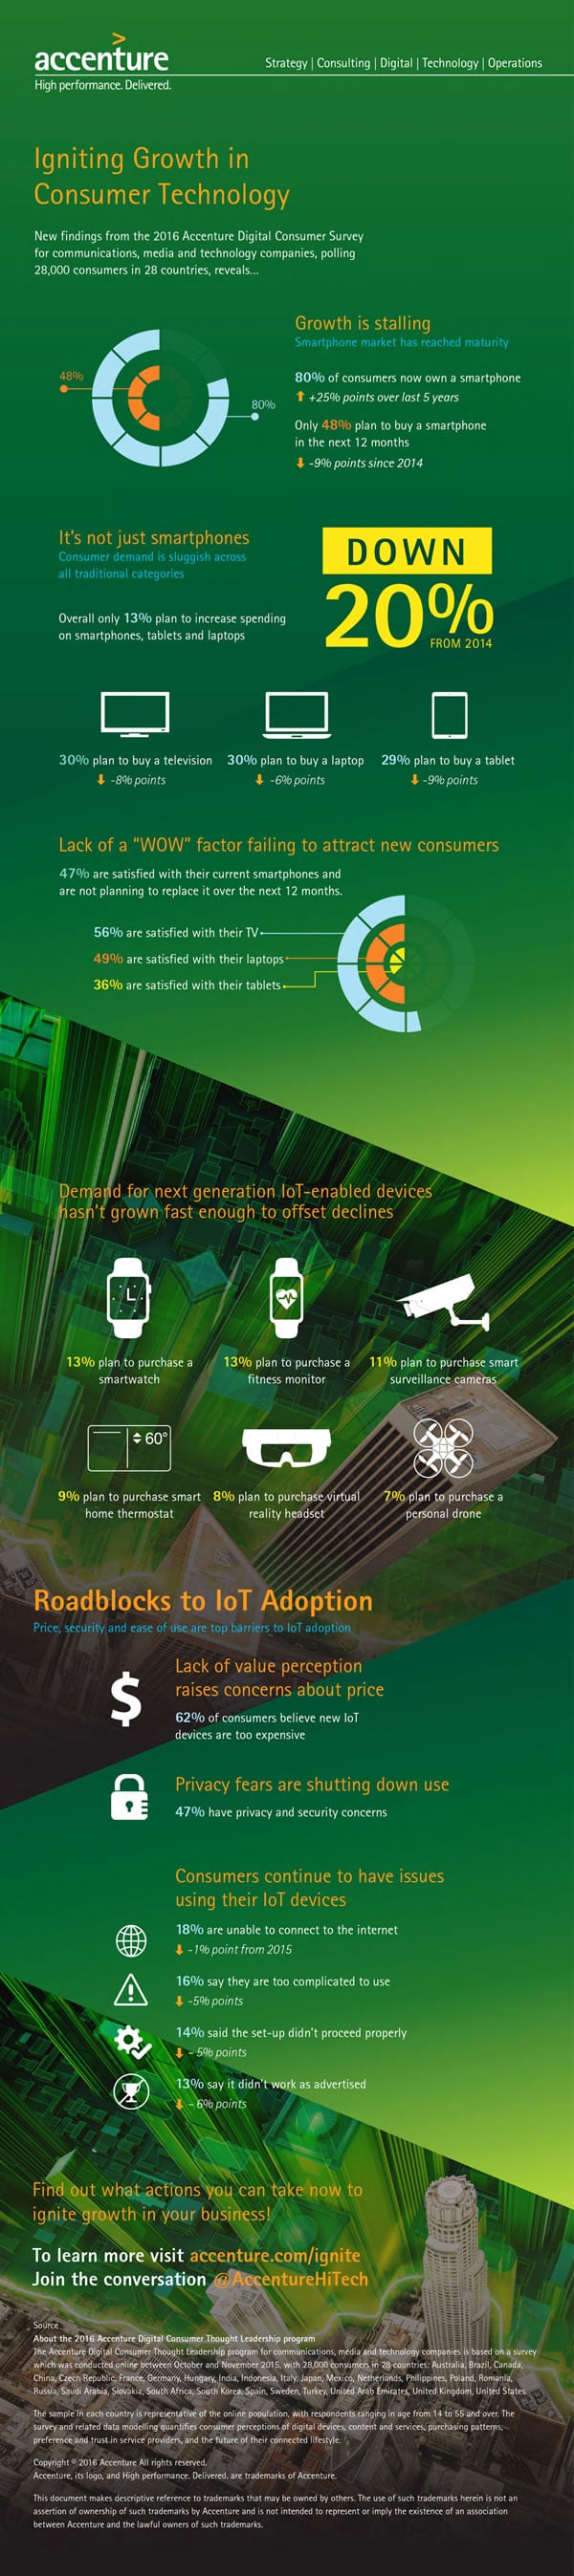 Accenture infographic - Igniting Growth in Consumer Technology - copyright Accenture - click for full infographic in PDF